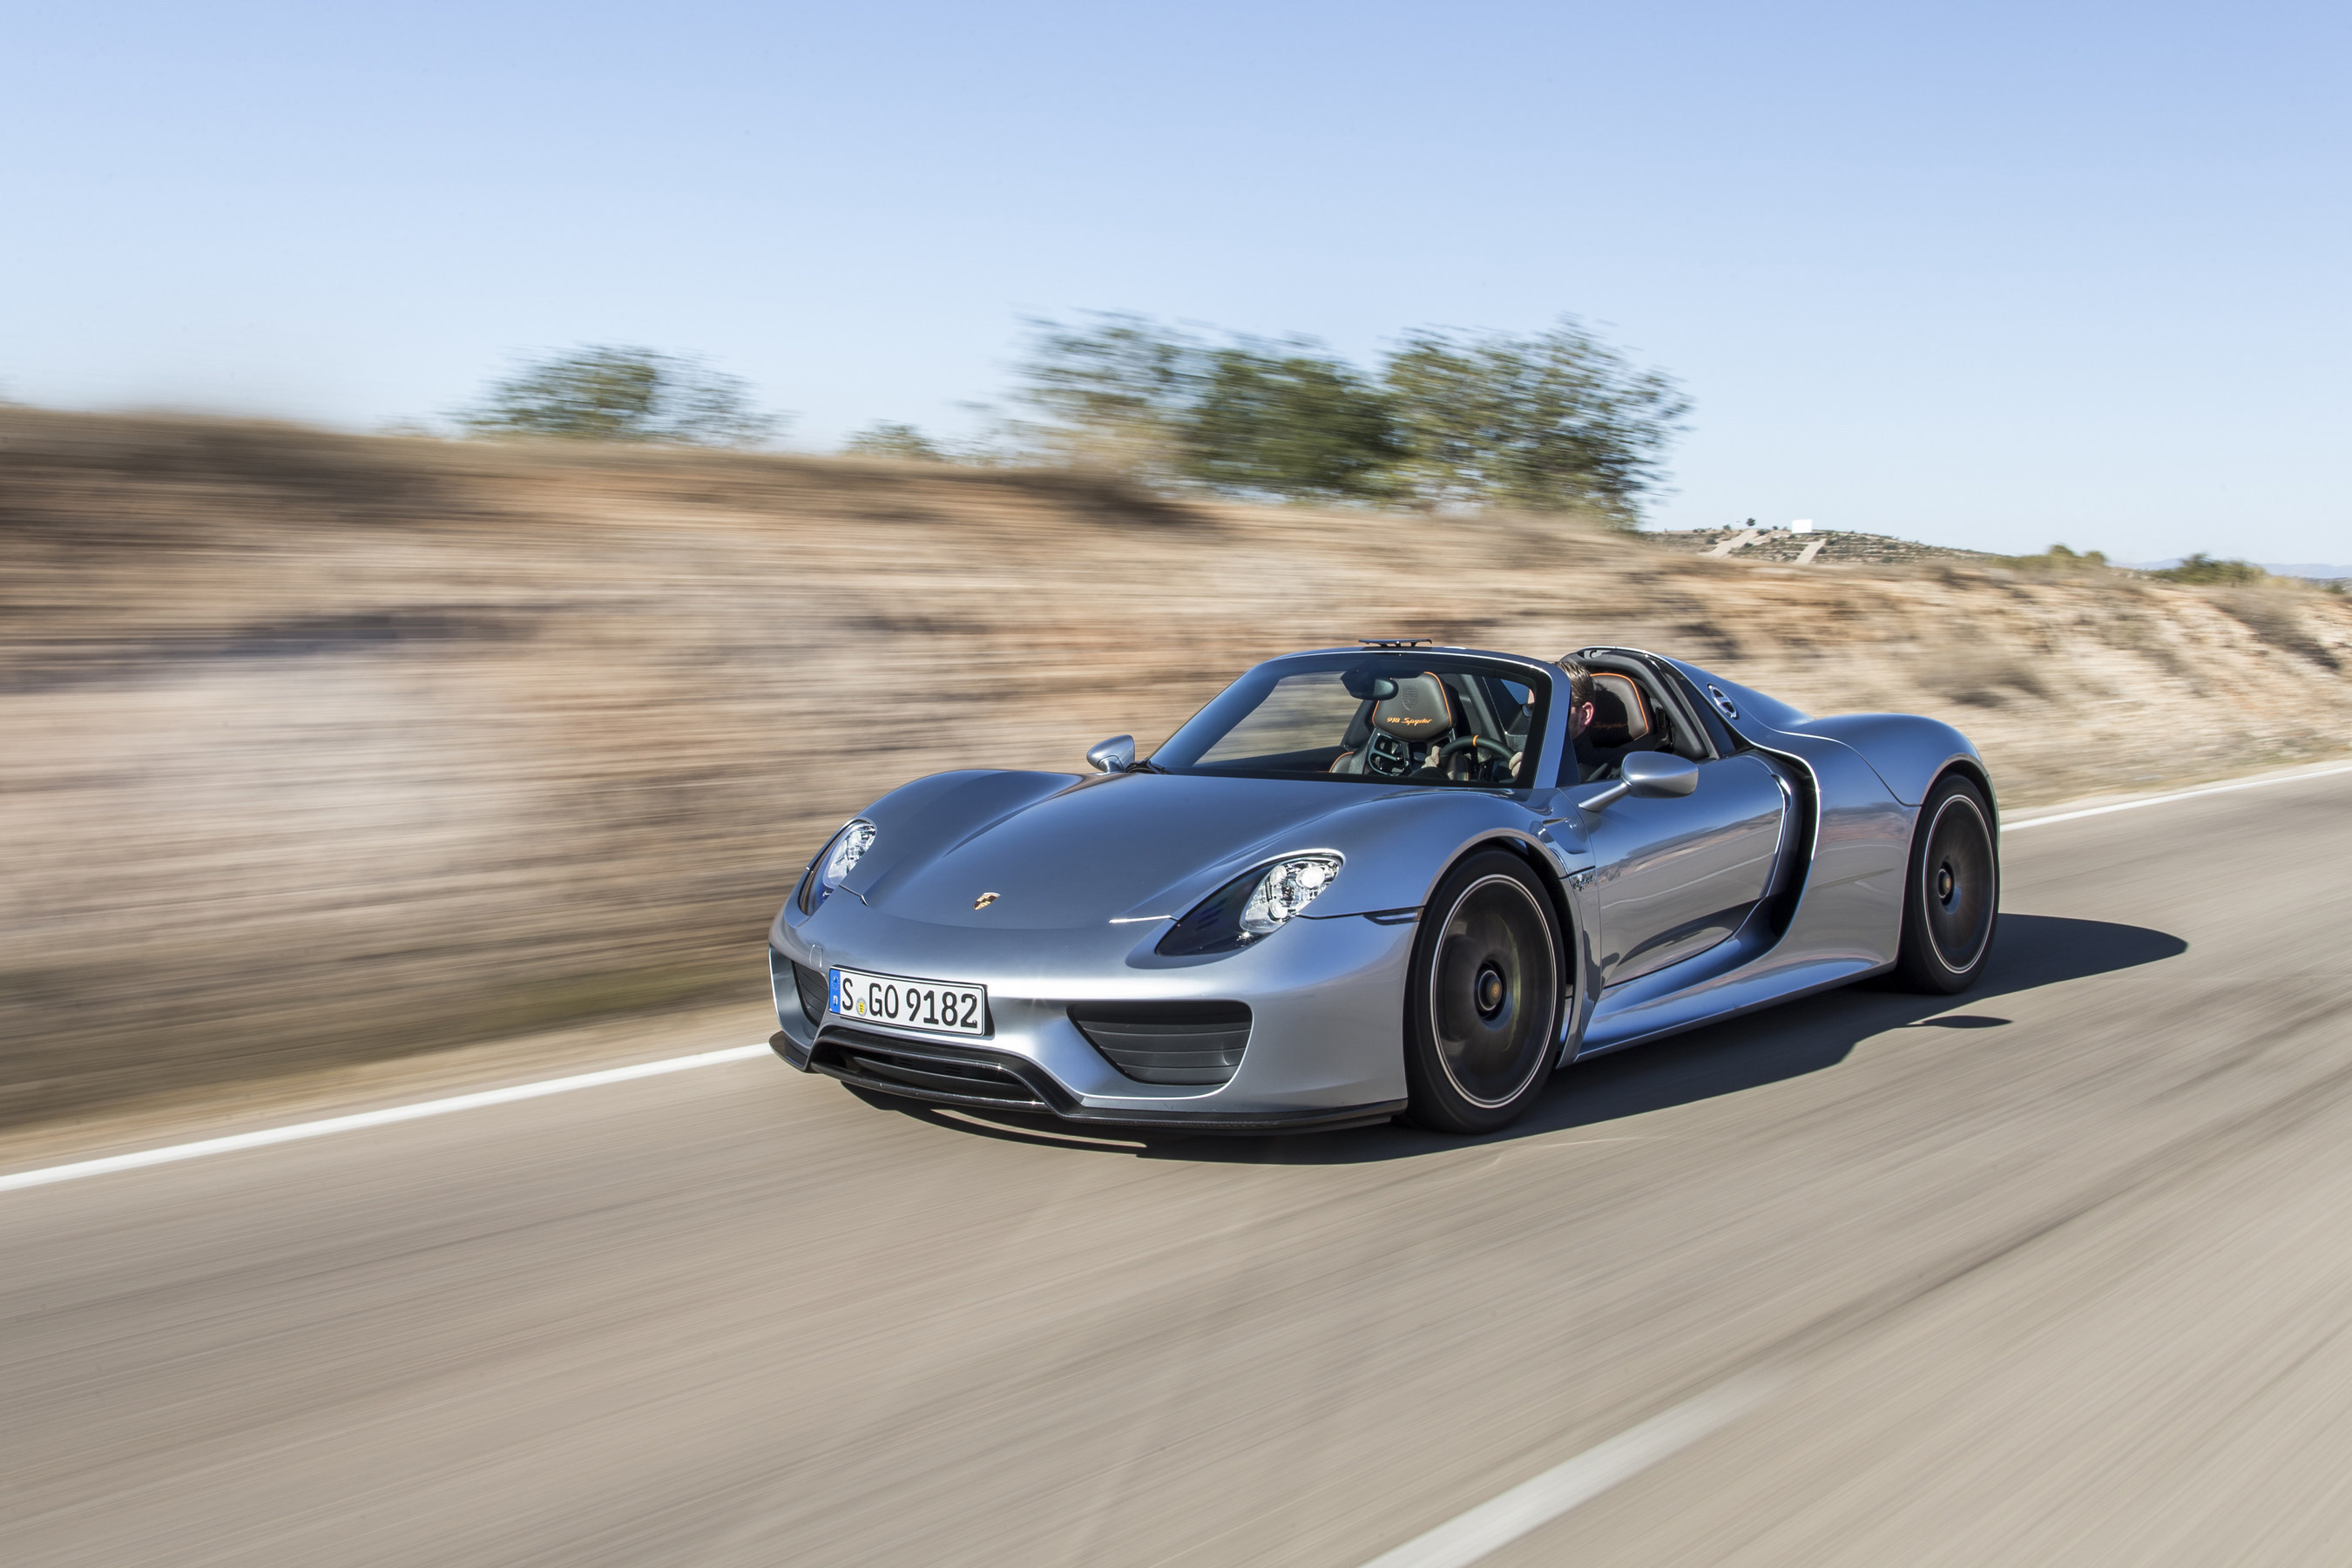 The Porsche 918 Spyder wins the Robb Report 2015 Car of the Year award.